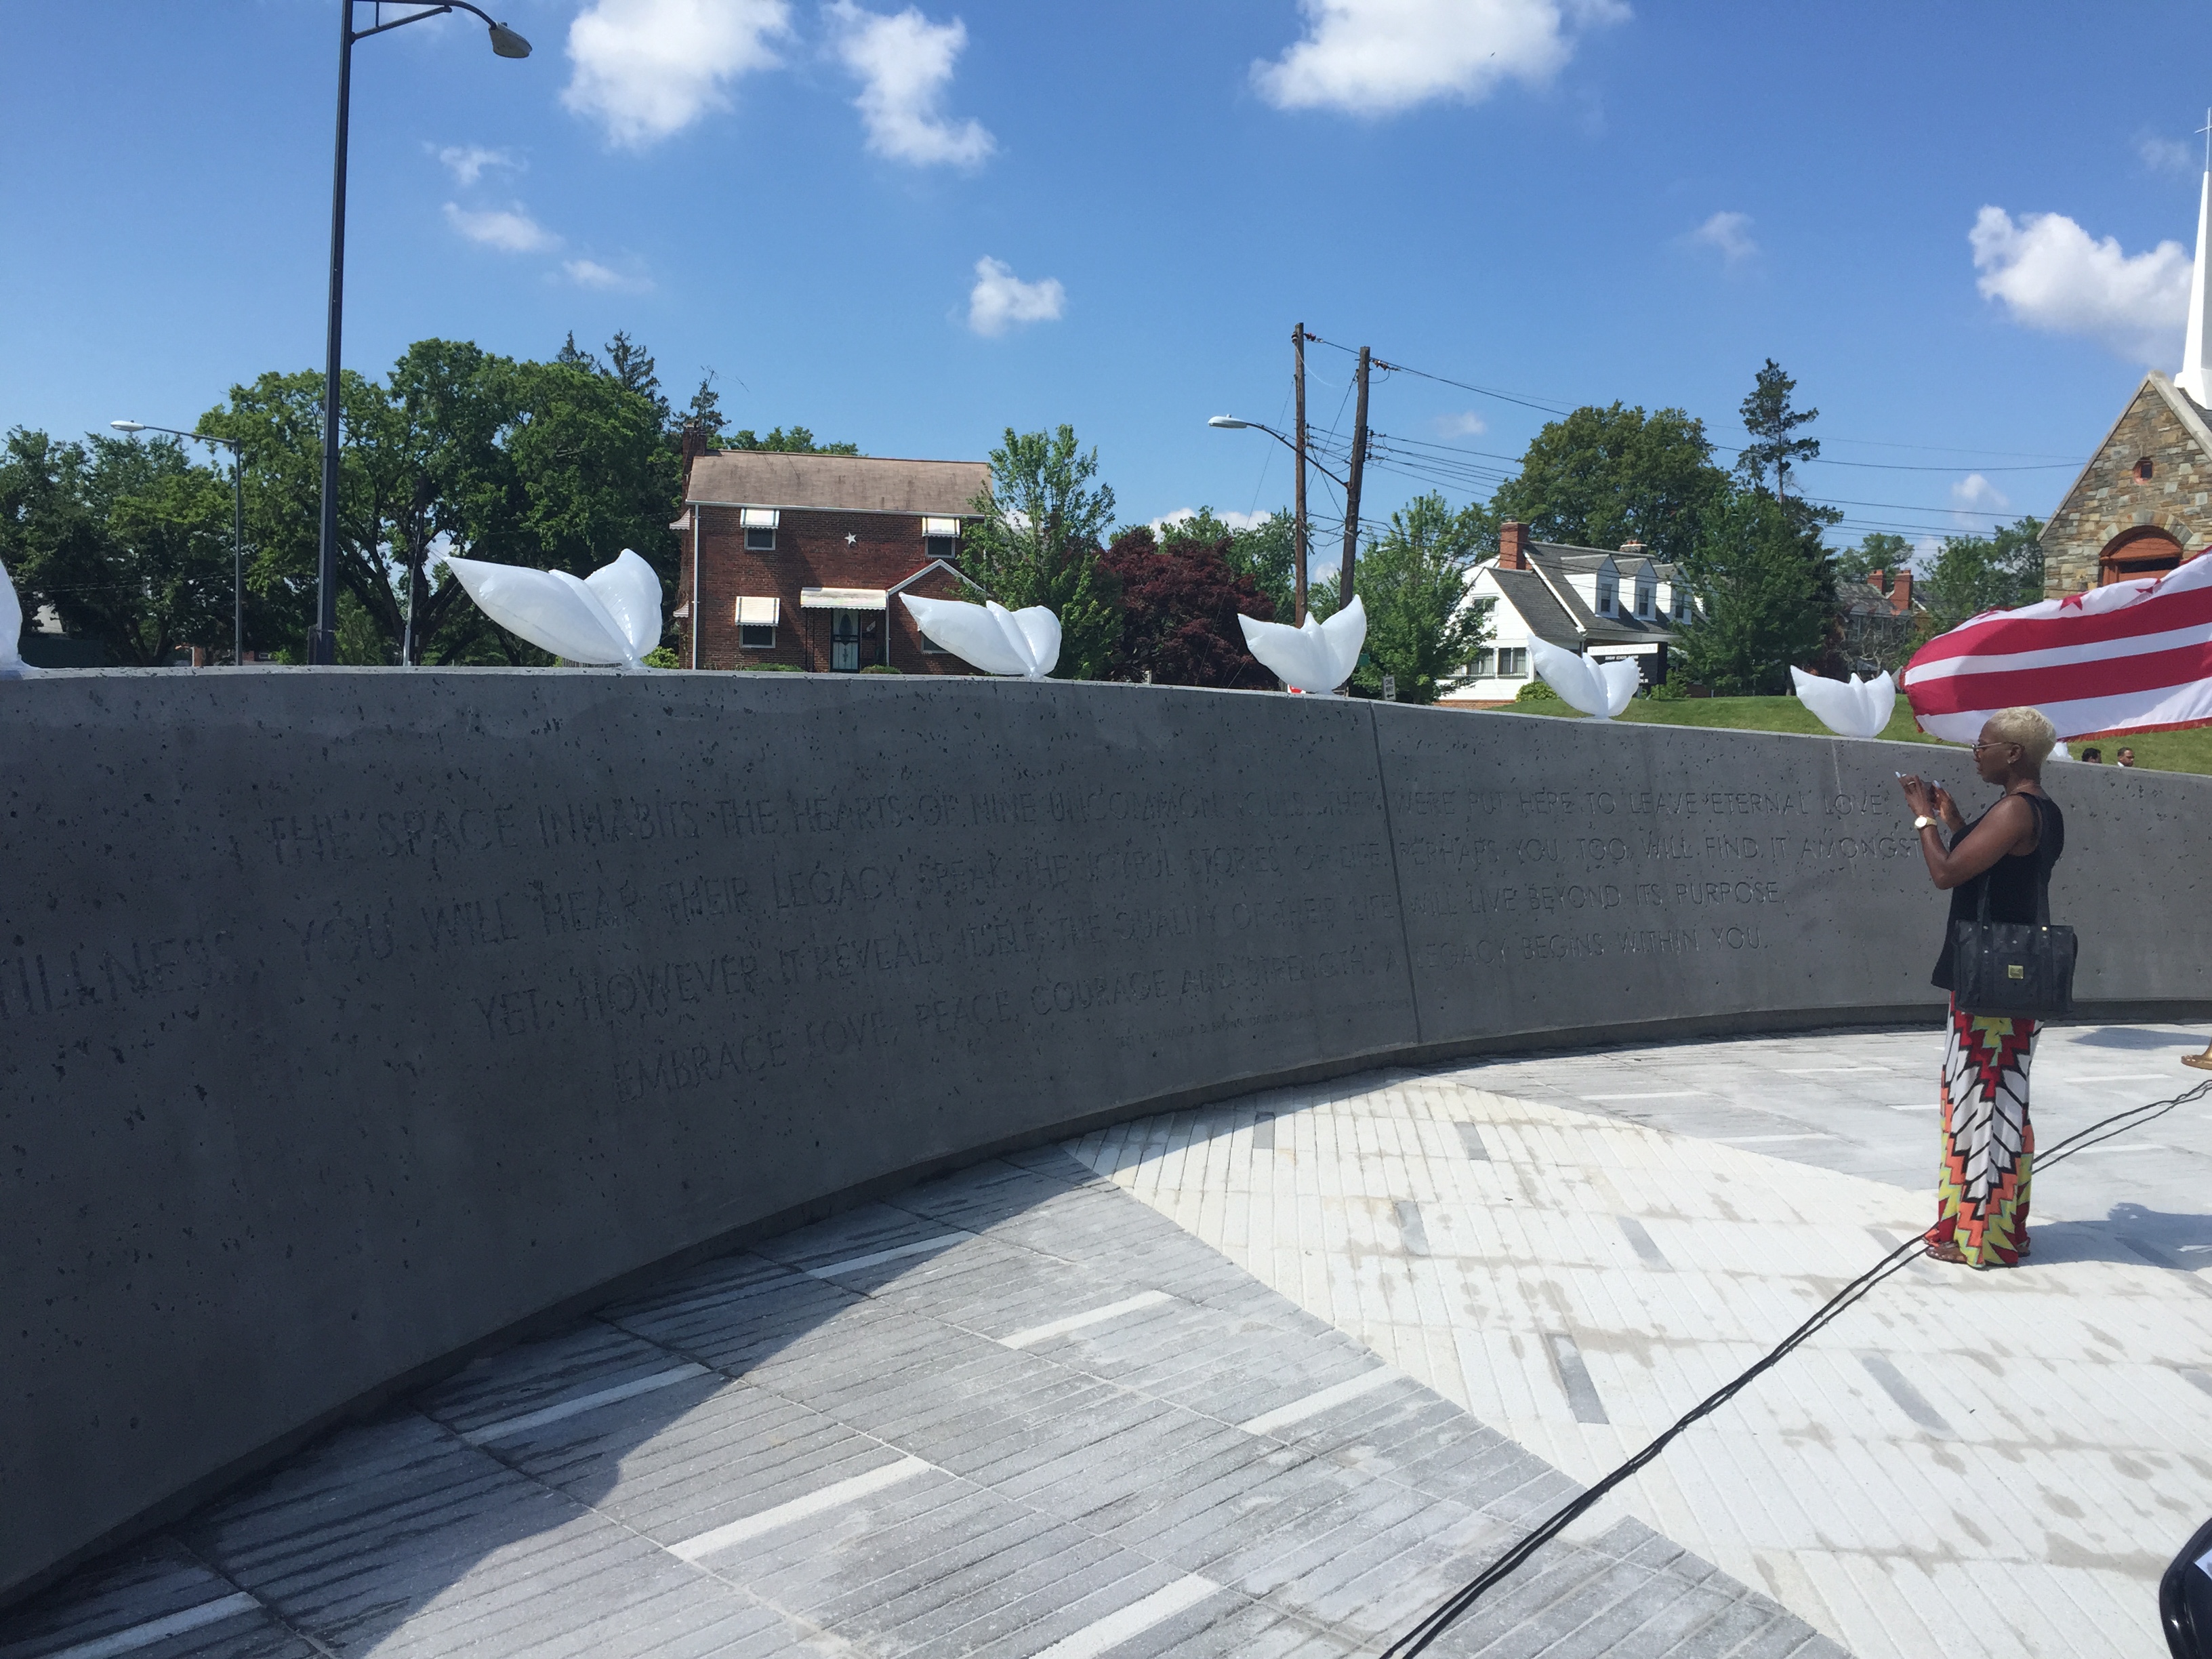 D.C. opens memorial to 9 killed in 2009 Red Line crash